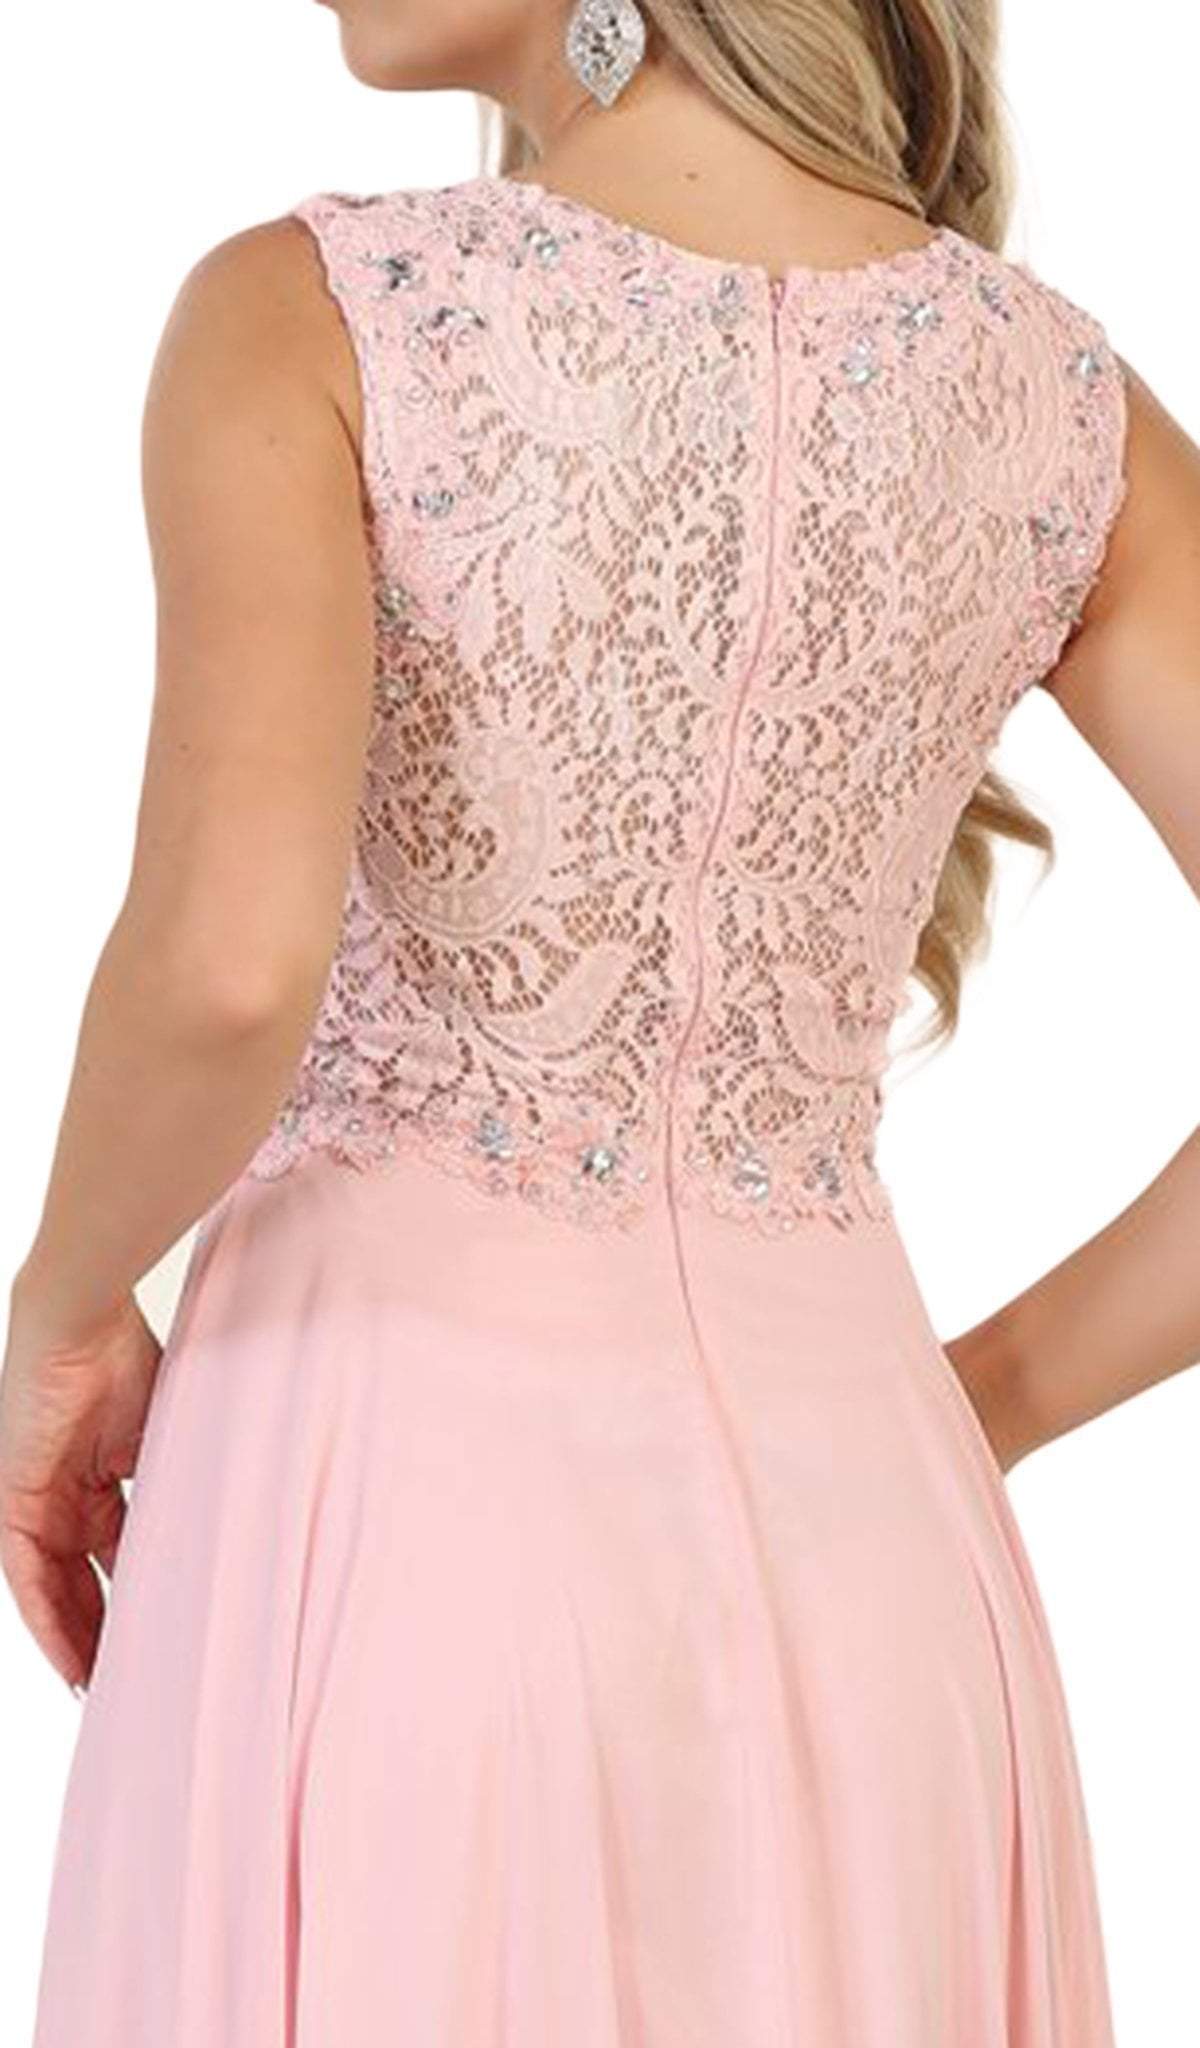 May Queen - Embellished Lace Pleated Prom Dress Bridesmaid Dresses